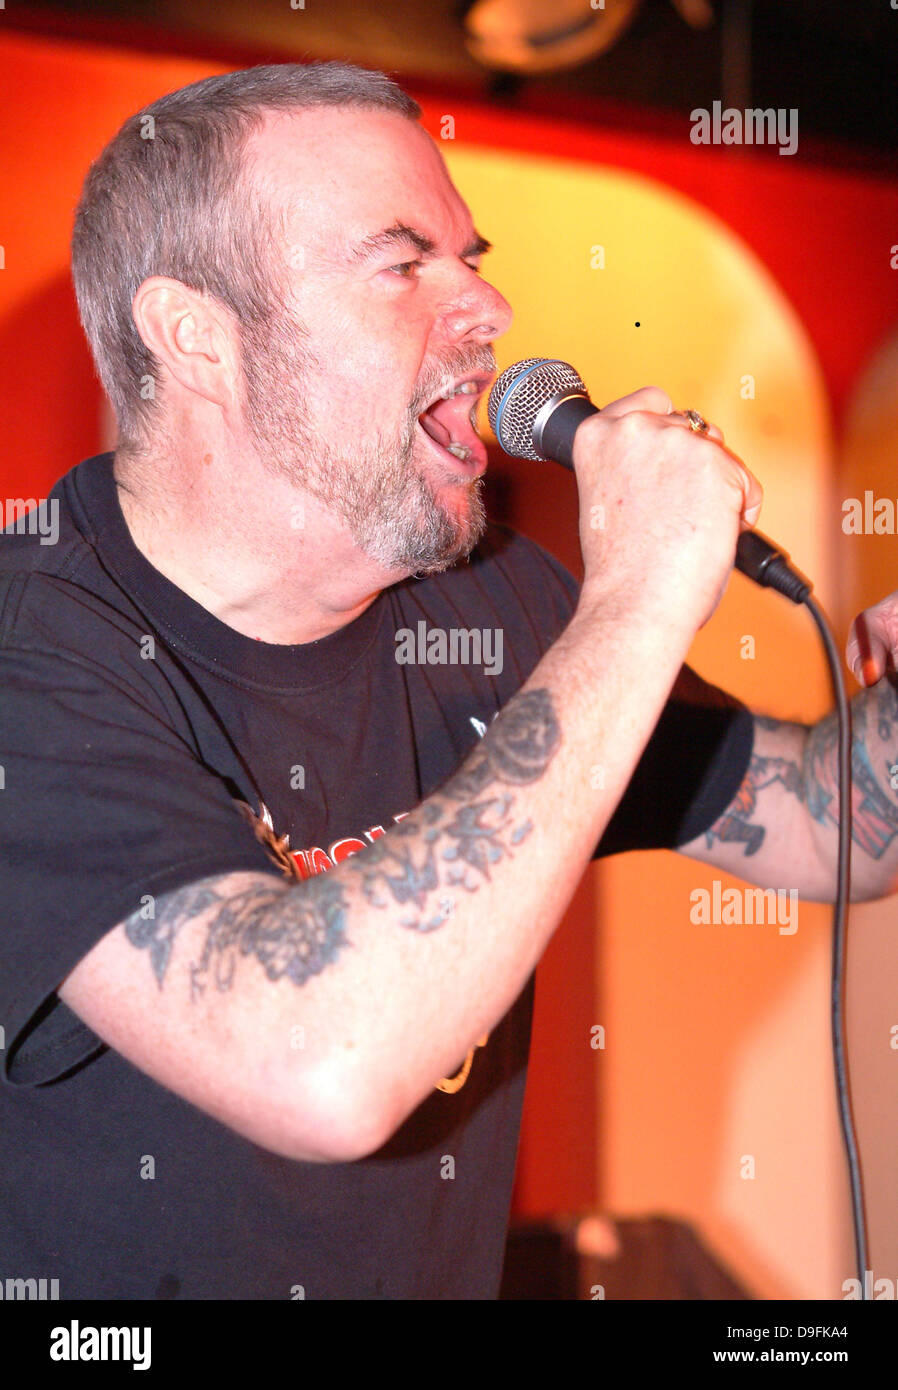 Gary Bushell  performing with The Gonads at The 100 Club  London England - 03.03.11 Stock Photo